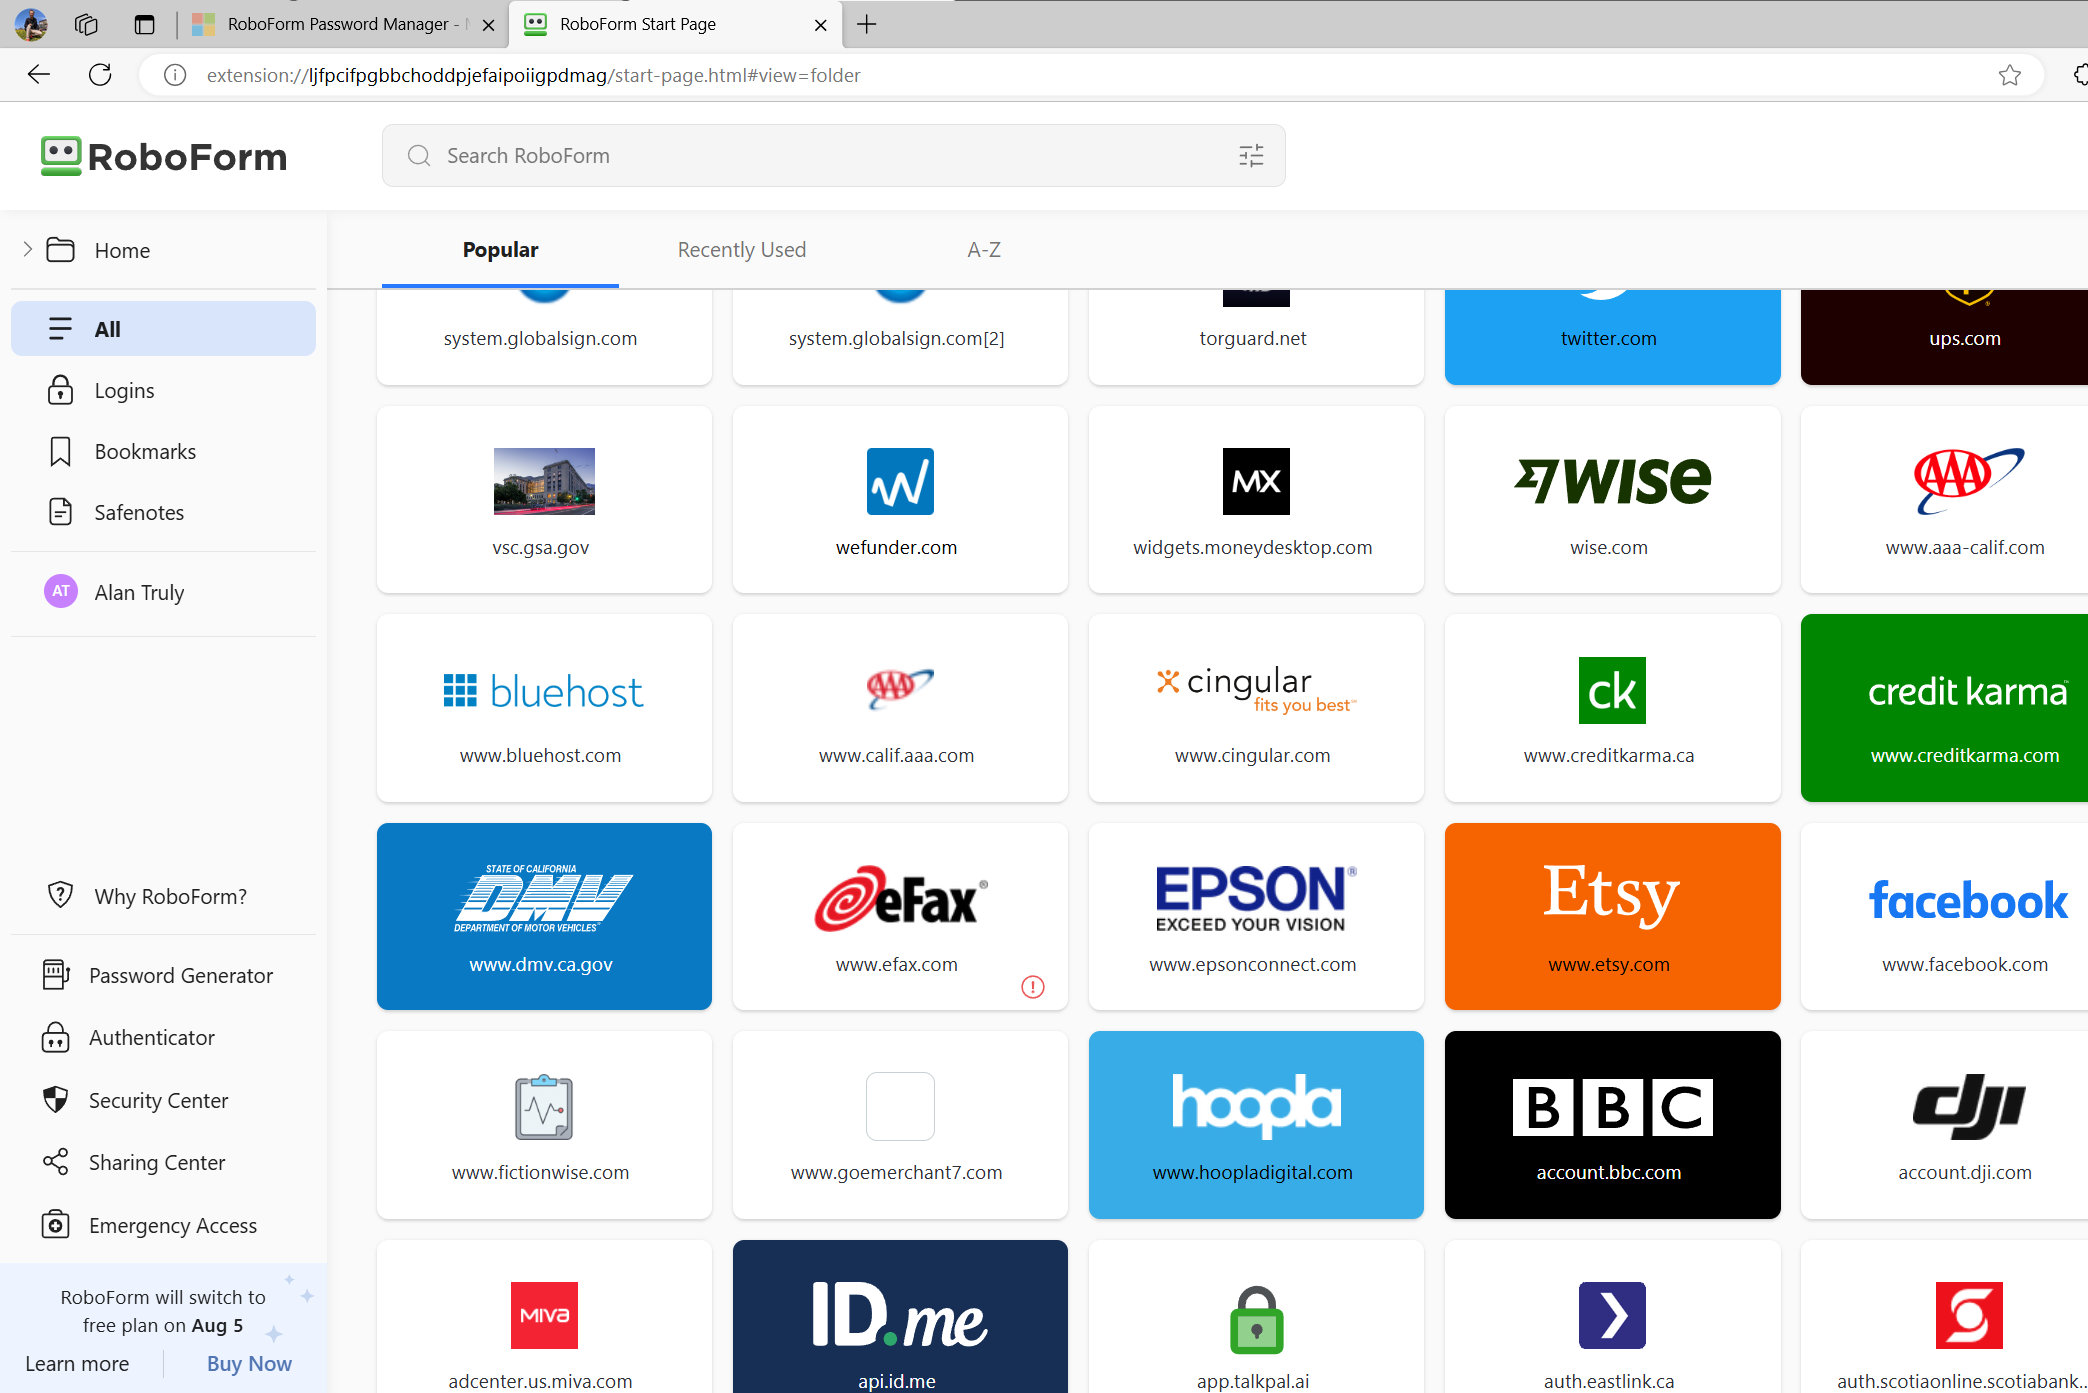 RoboForm's user interface is bold and friendly, showing logos for most websites.